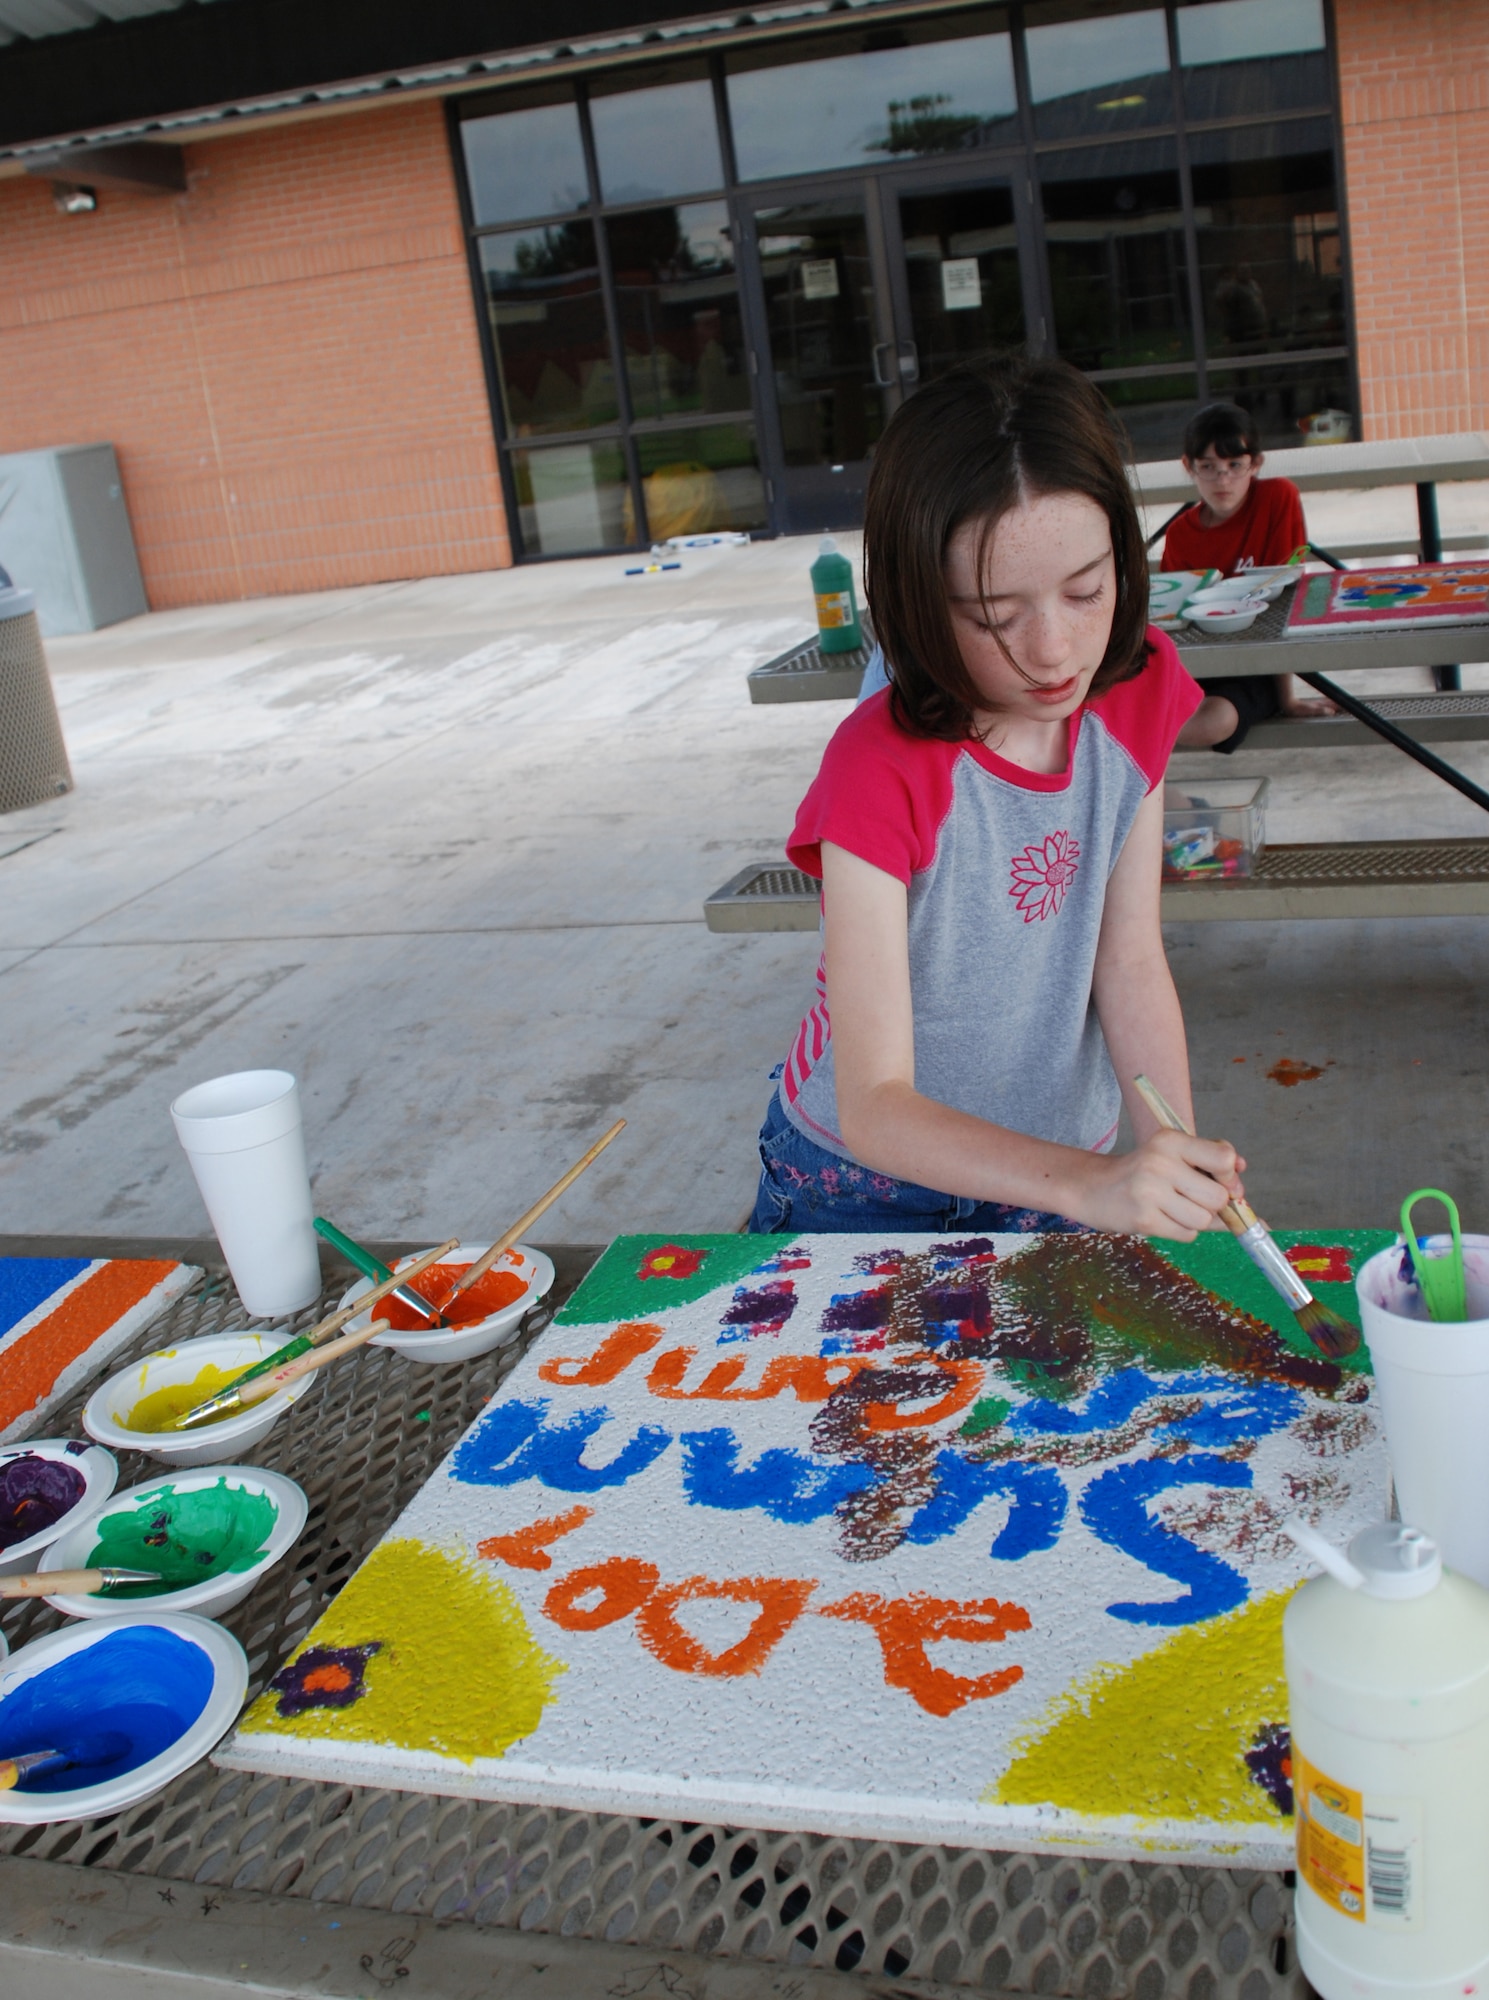 Cheyenne Haney paints a ceiling tile at the Madrigal Youth Centers summer camp June 5. The children attending the camp are painting the tiles to be put in the centers ceiling. (U.S. Air Force photo/Airman 1st Class Jacob Corbin)